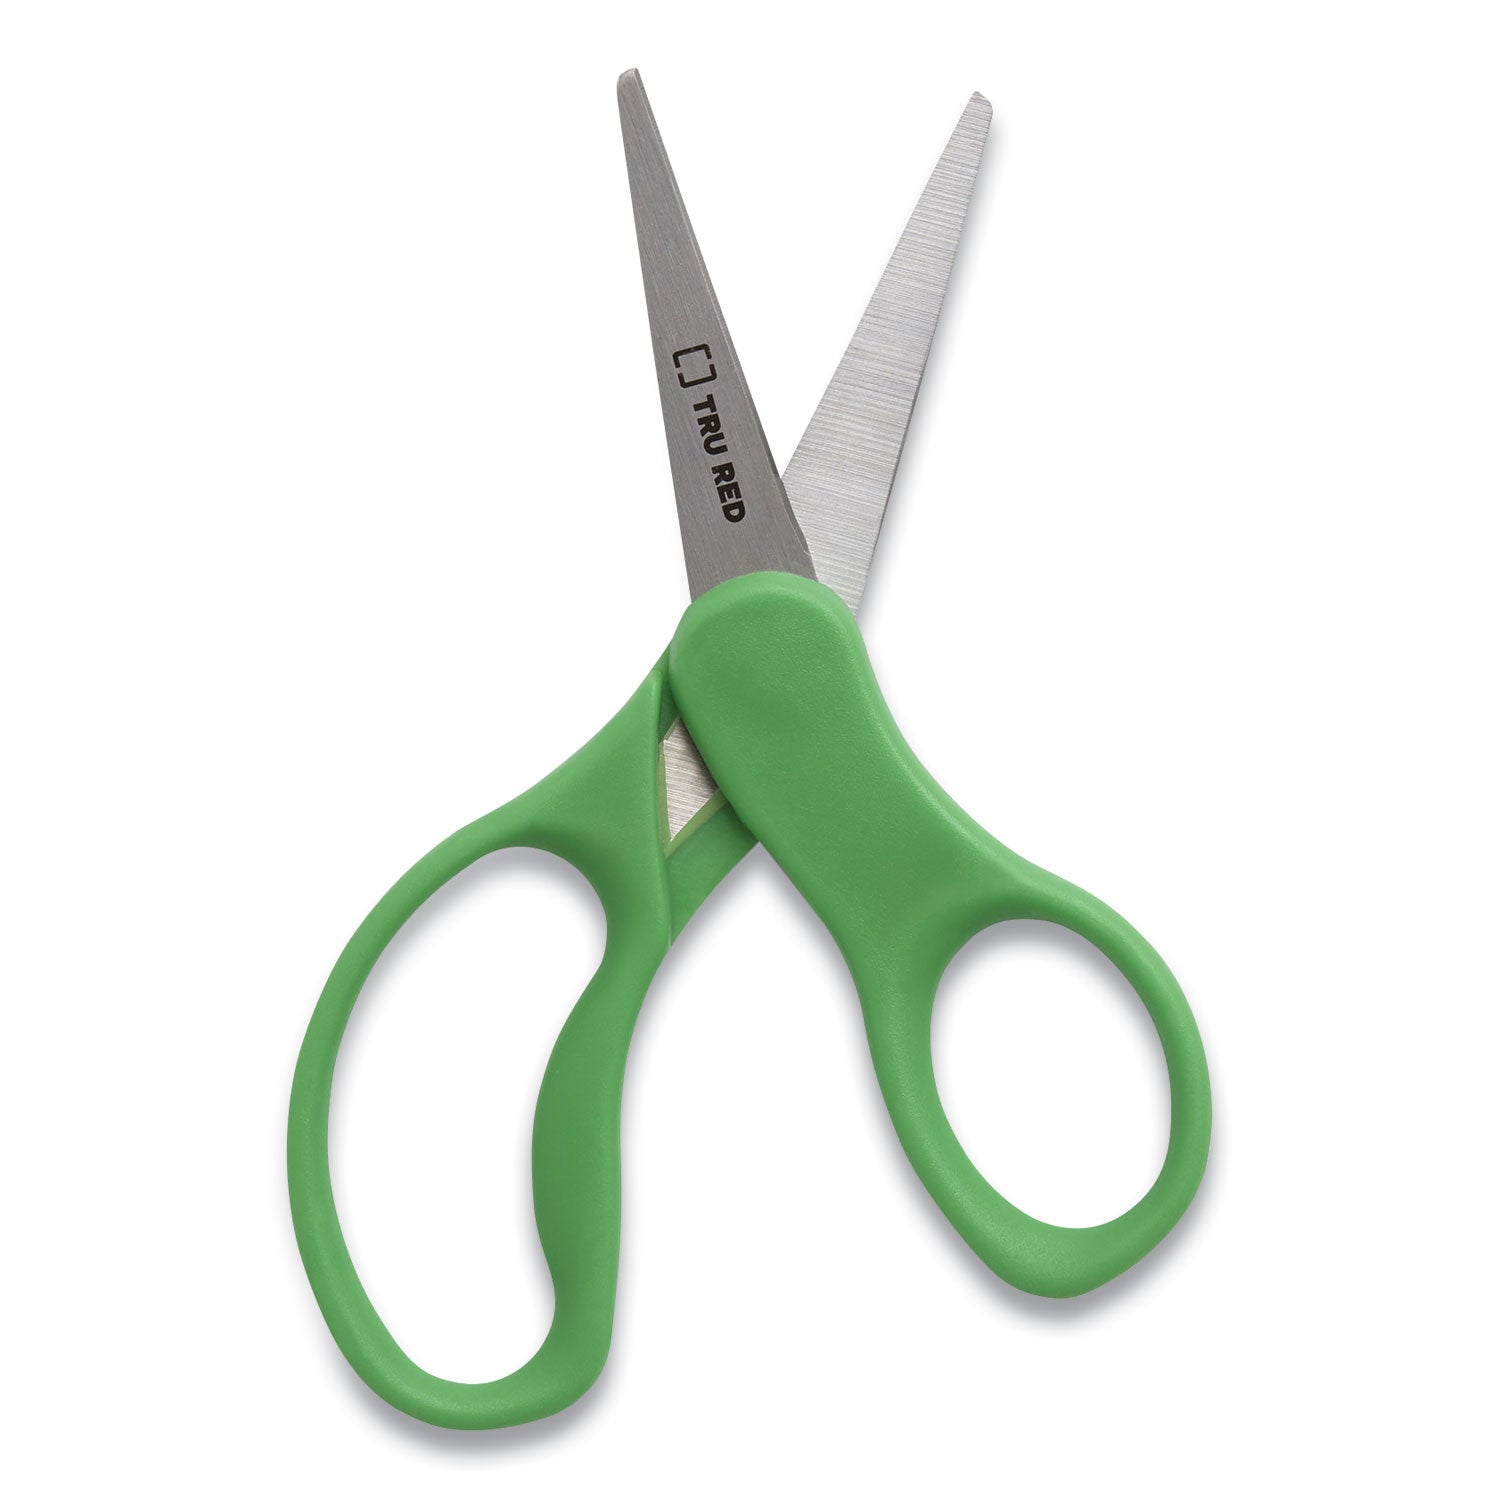 kids-pointed-tip-stainless-steel-scissors-5-long-205-cut-length-assorted-straight-handles-12-pack_tud24380506 - 5